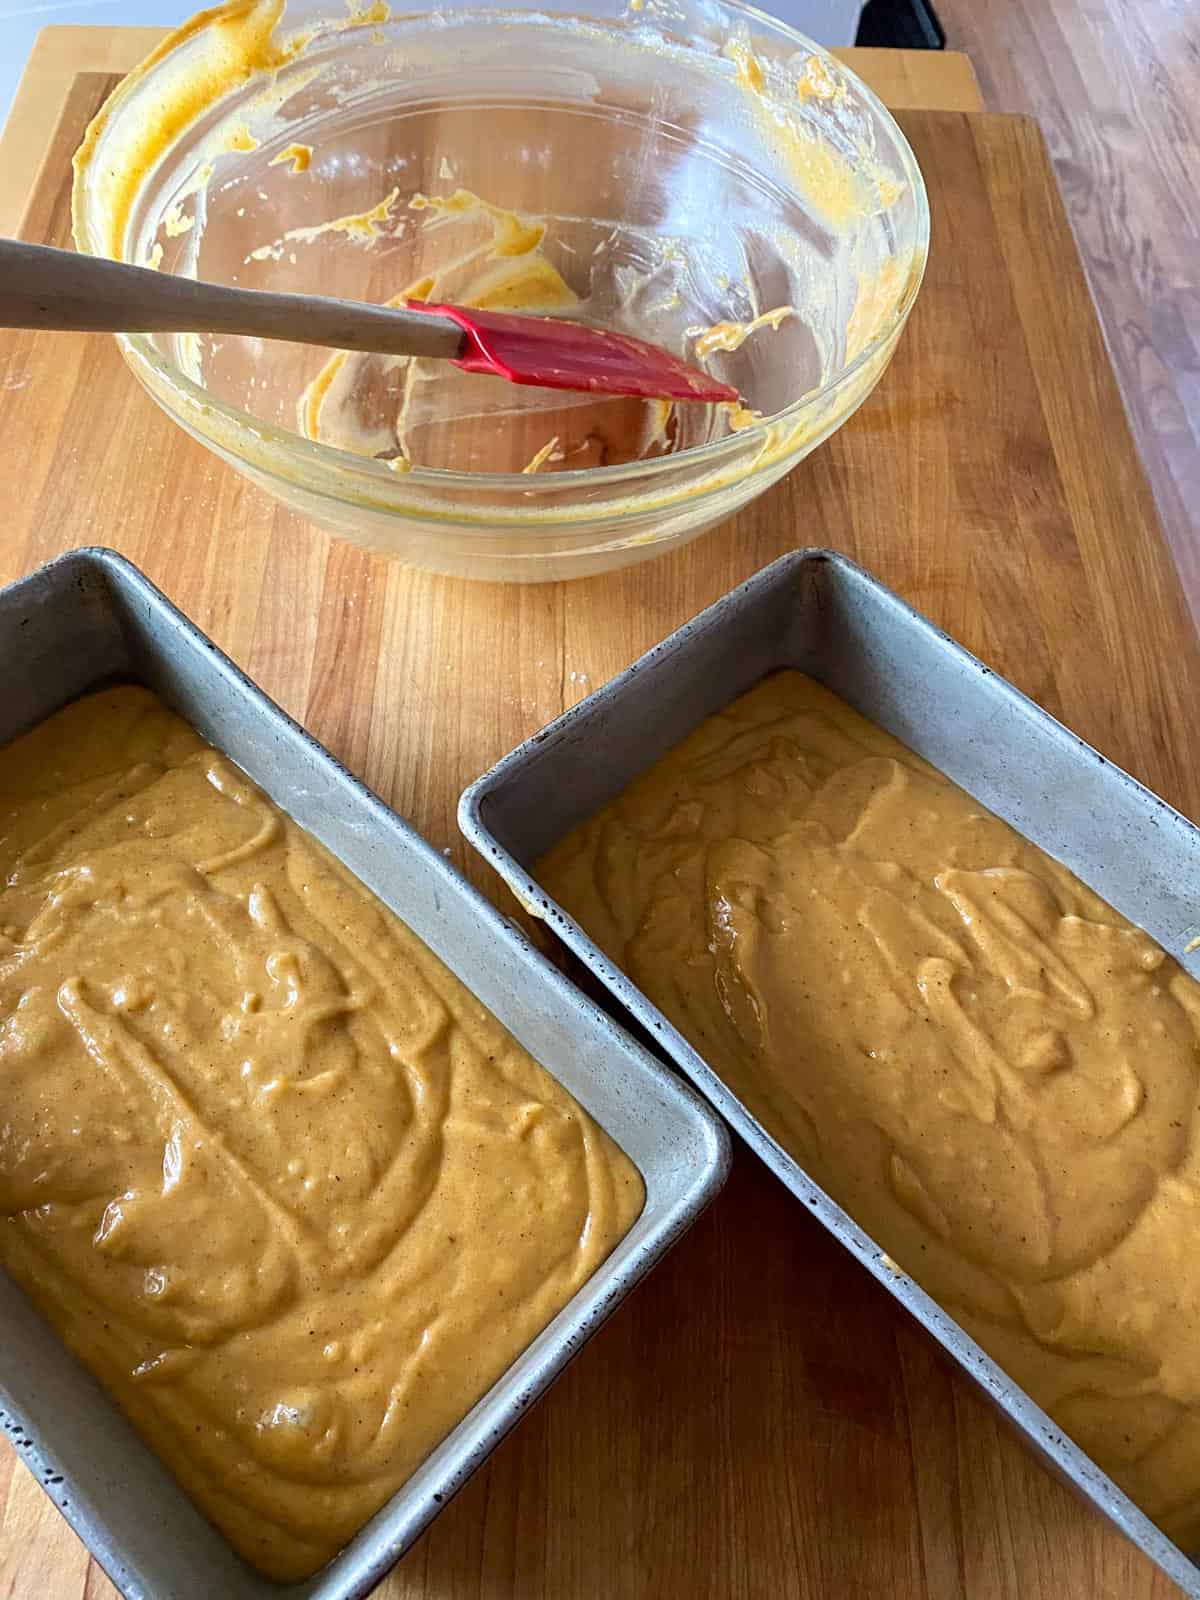 An empty glass bowl and red rubber spatula used to mix spiced pumpkin bread ingredients. And 2 metal bread pans containing pumpkin spice bread batter.